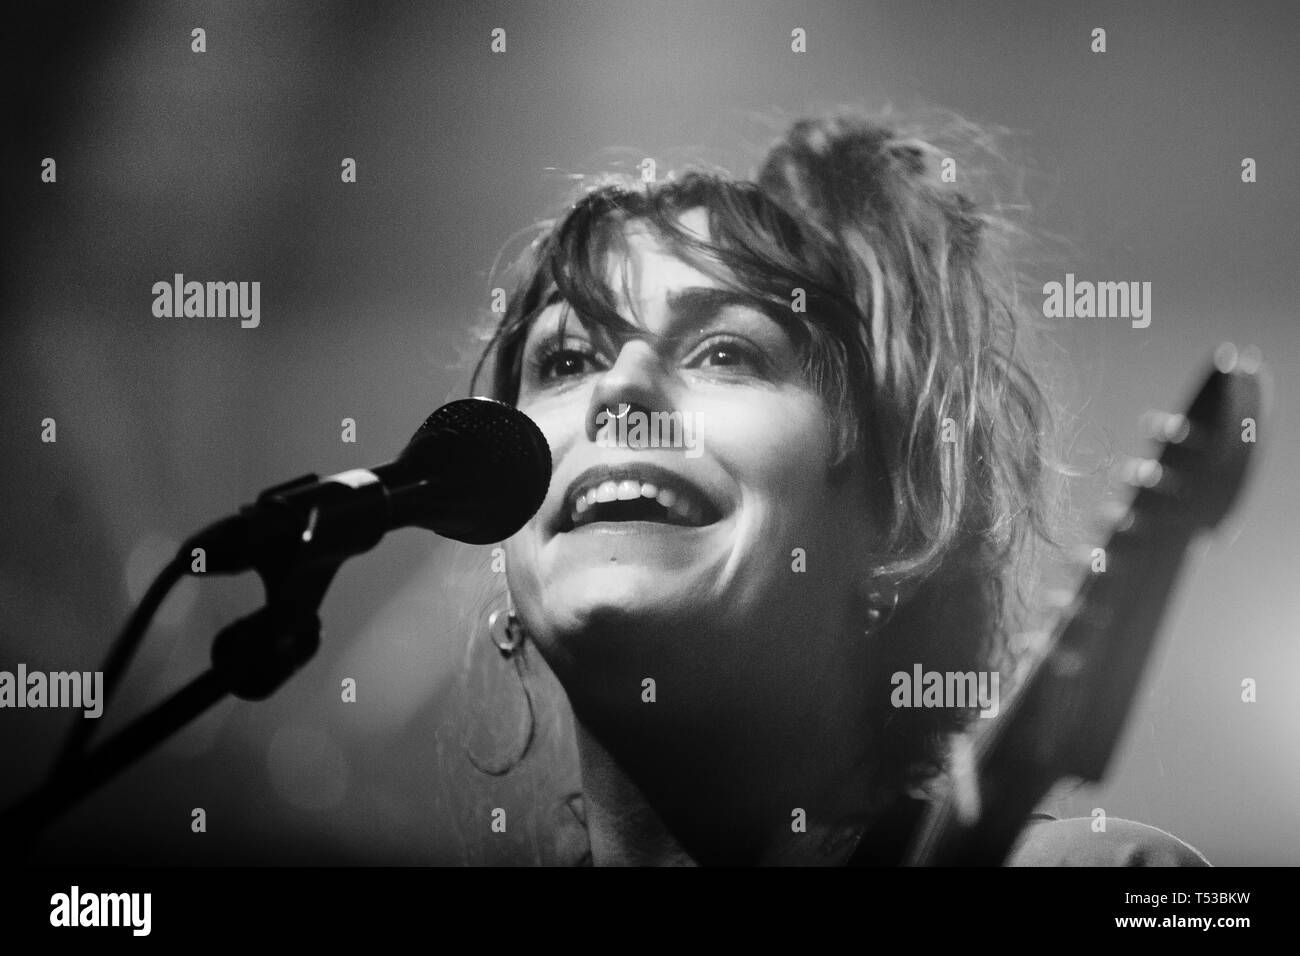 Netherlands, Tilburg - April 12, 2019. The American singer, musician and composer Emma Ruth Rundle performs a live concert during the Dutch metal festival Roadburn Festival 2019 in Tilburg. (Photo credit: Gonzales Photo - Peter Troest). Stock Photo